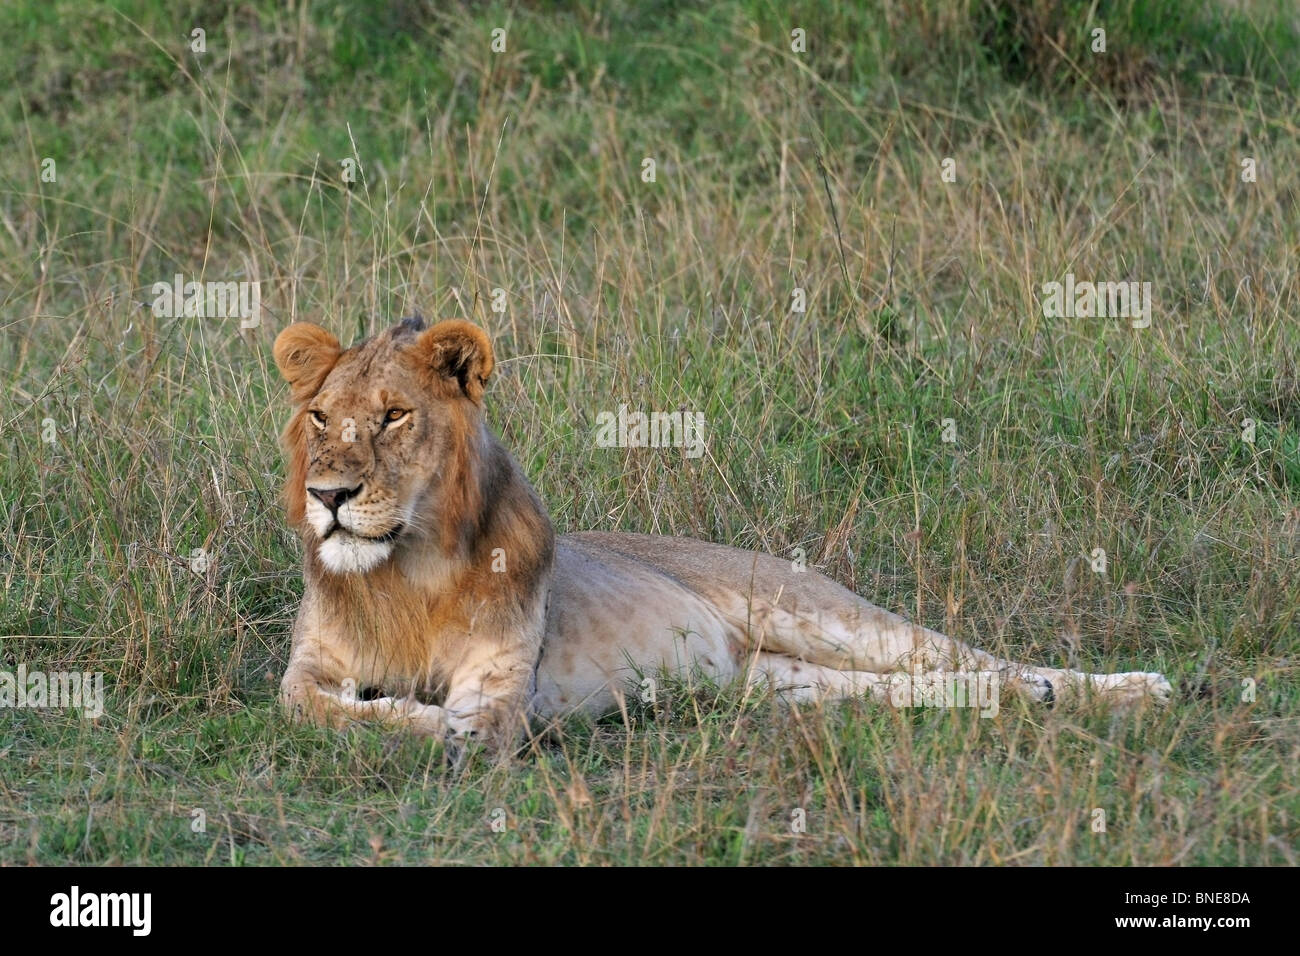 A young male Lion portrait shot. Picture taken in Masai Mara National Reserve, Kenya, East Africa. Stock Photo